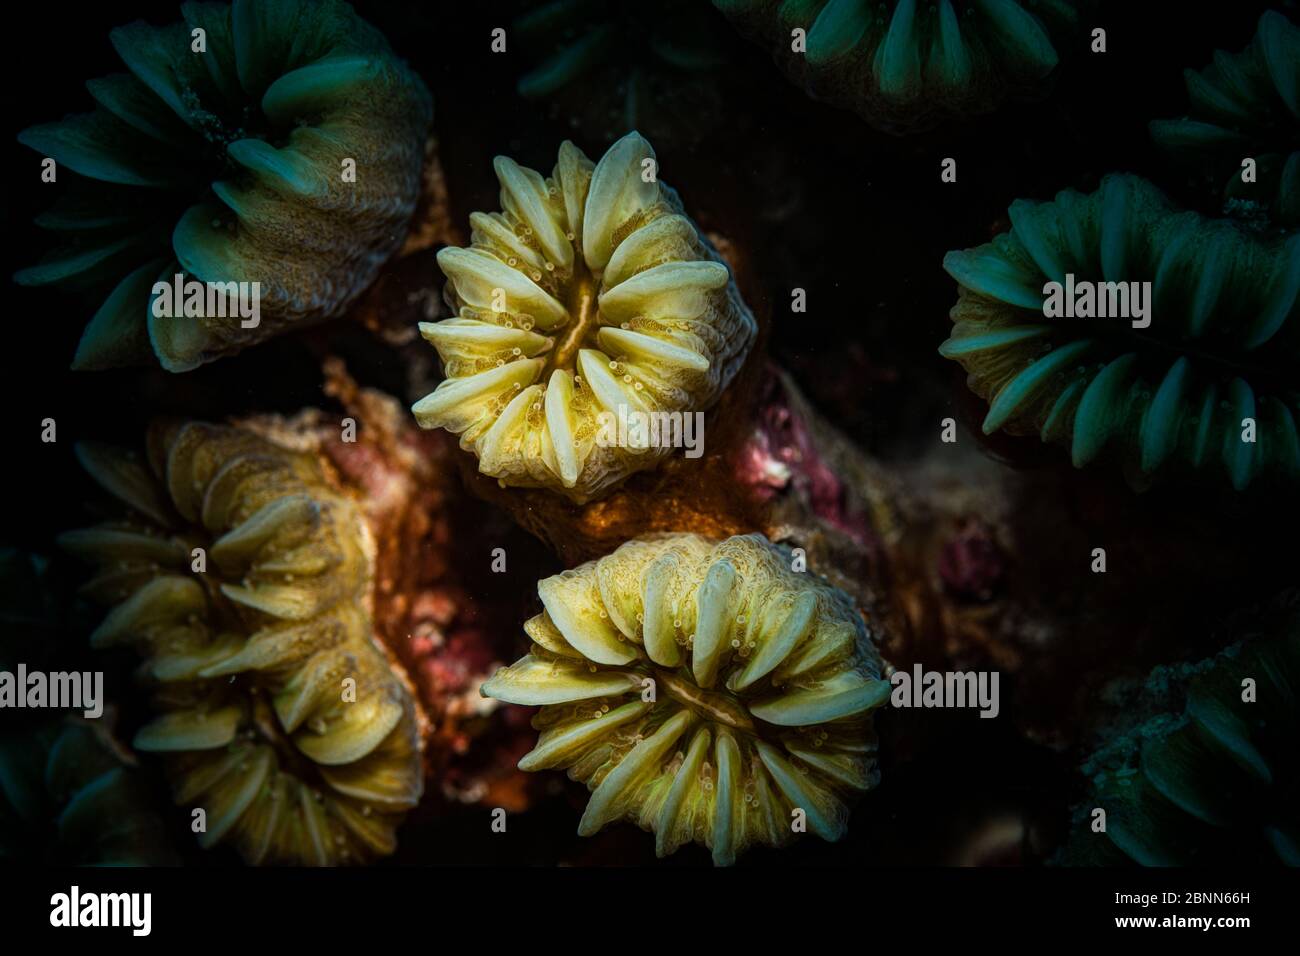 Cup Corals on the reef, Bonaire, Netherlands Antilles Stock Photo